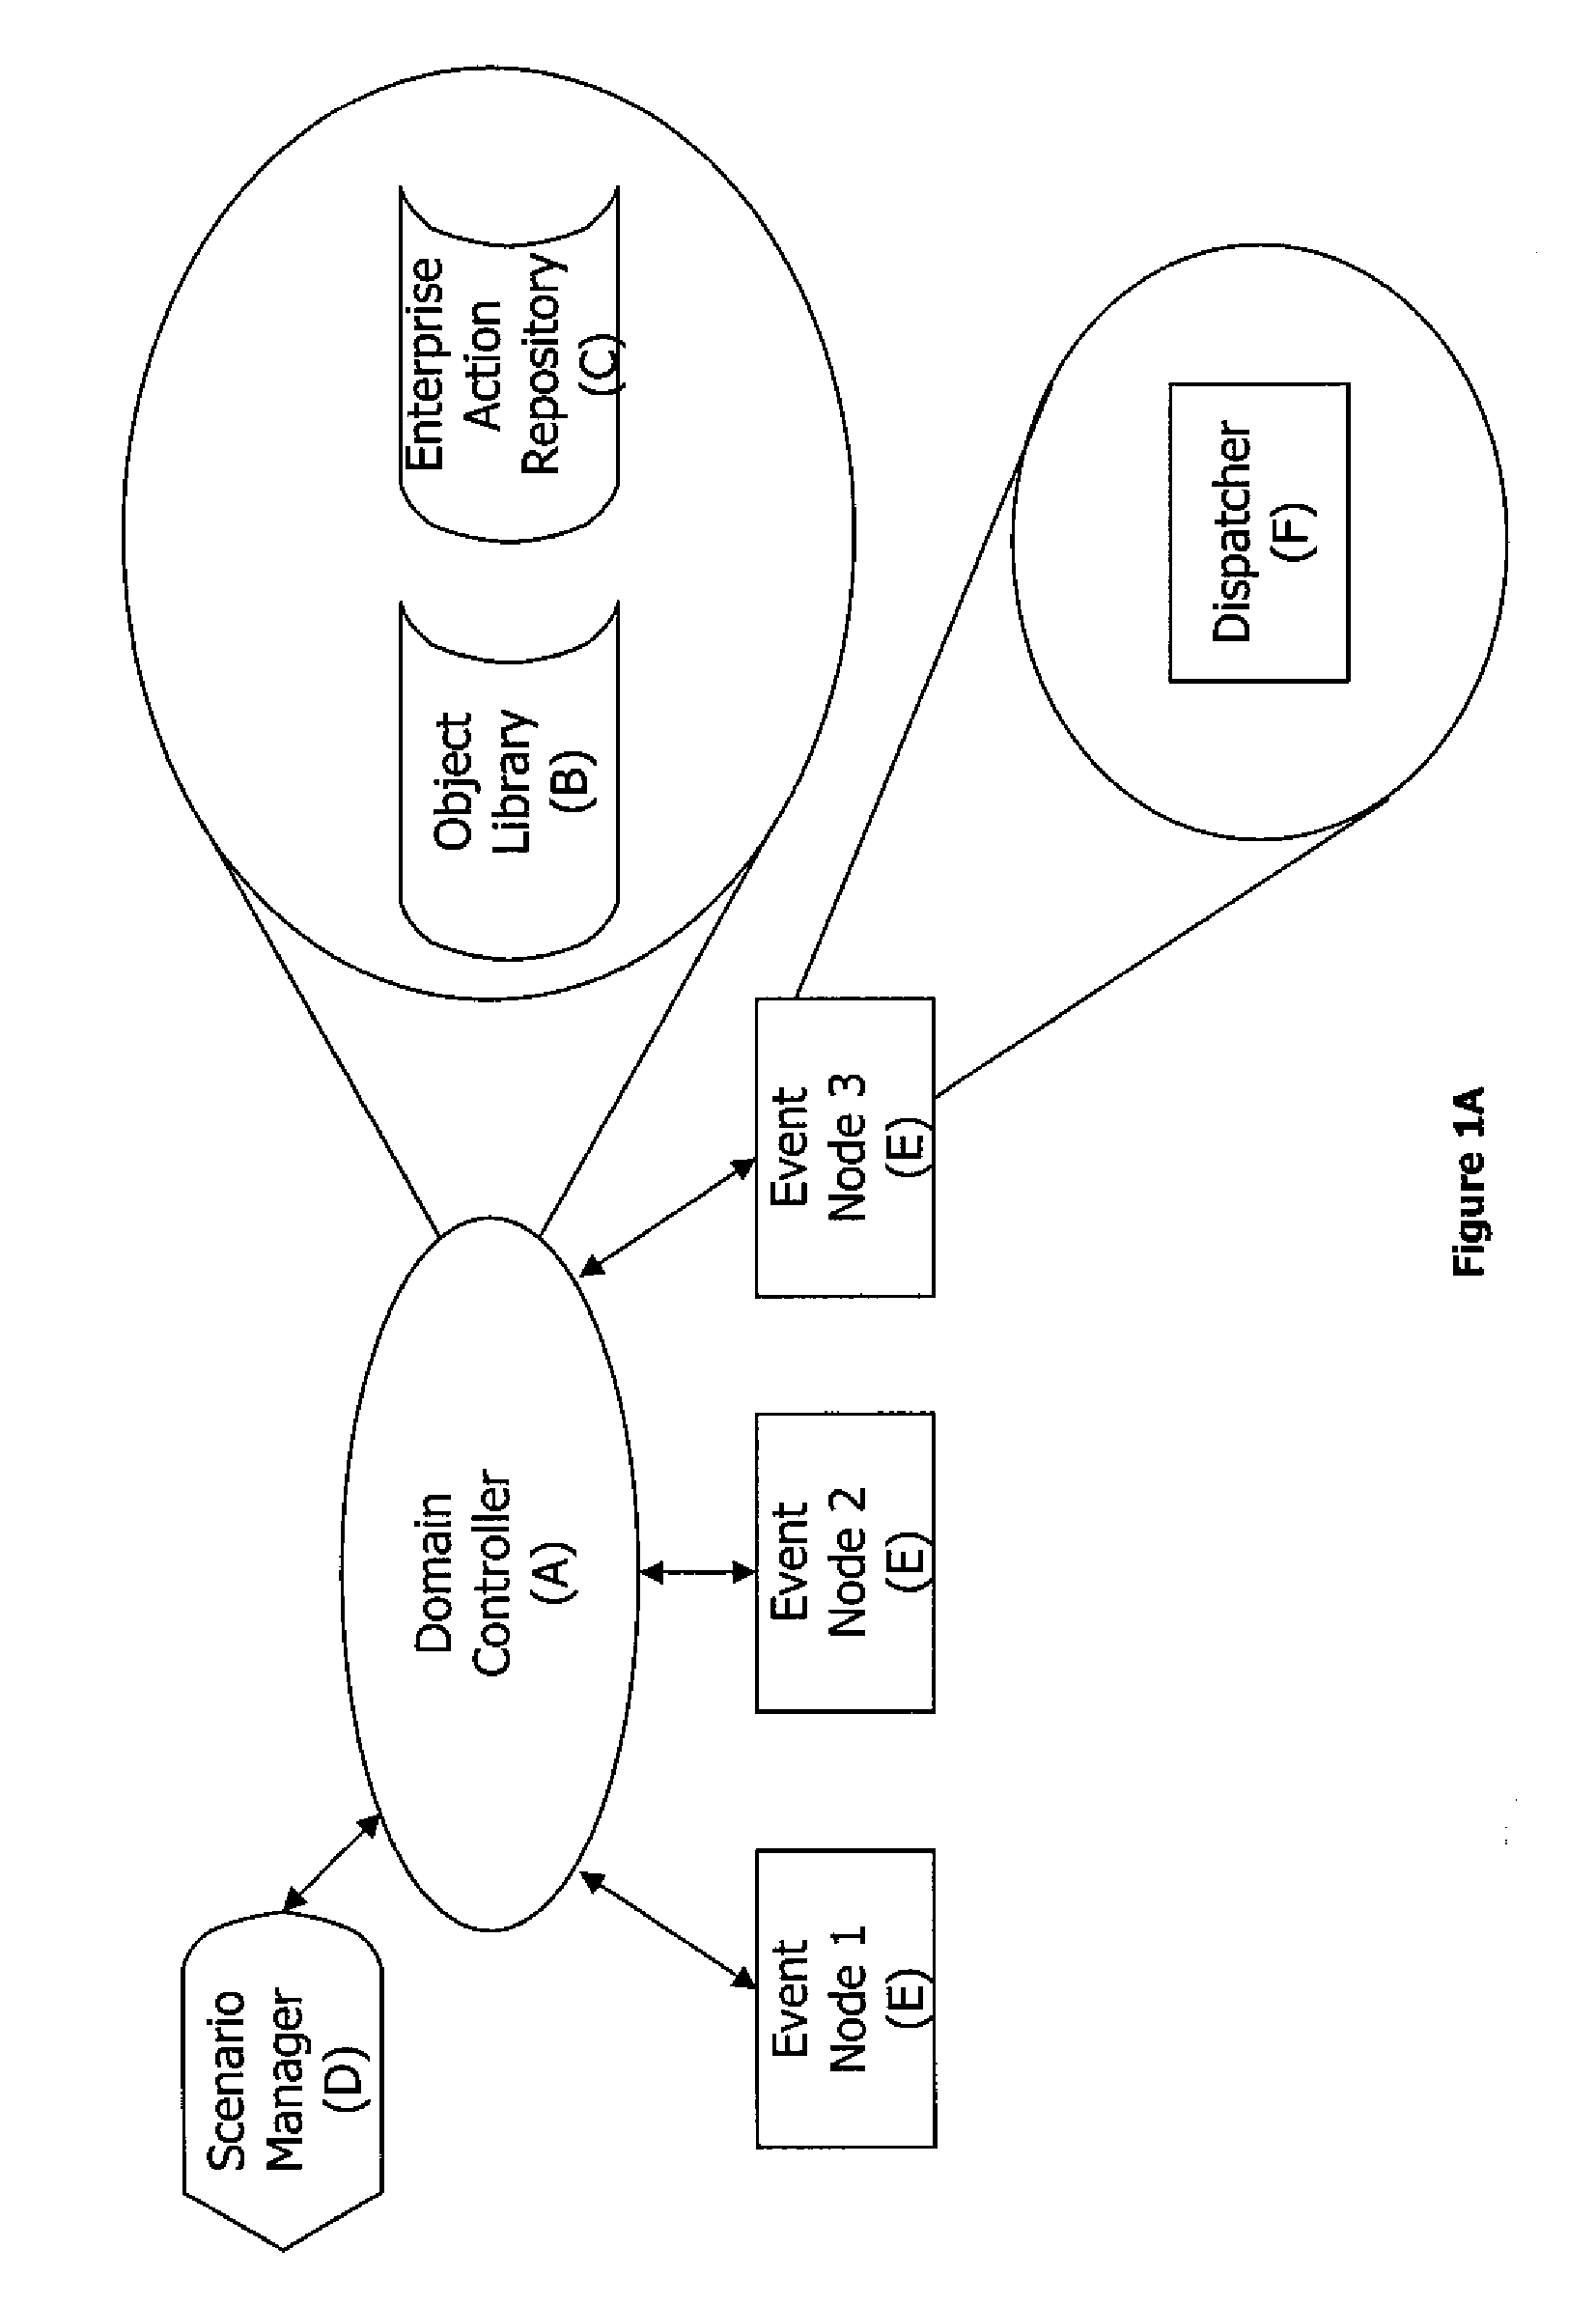 Method and system for building, processing, & maintaining scenarios in event-driven information systems